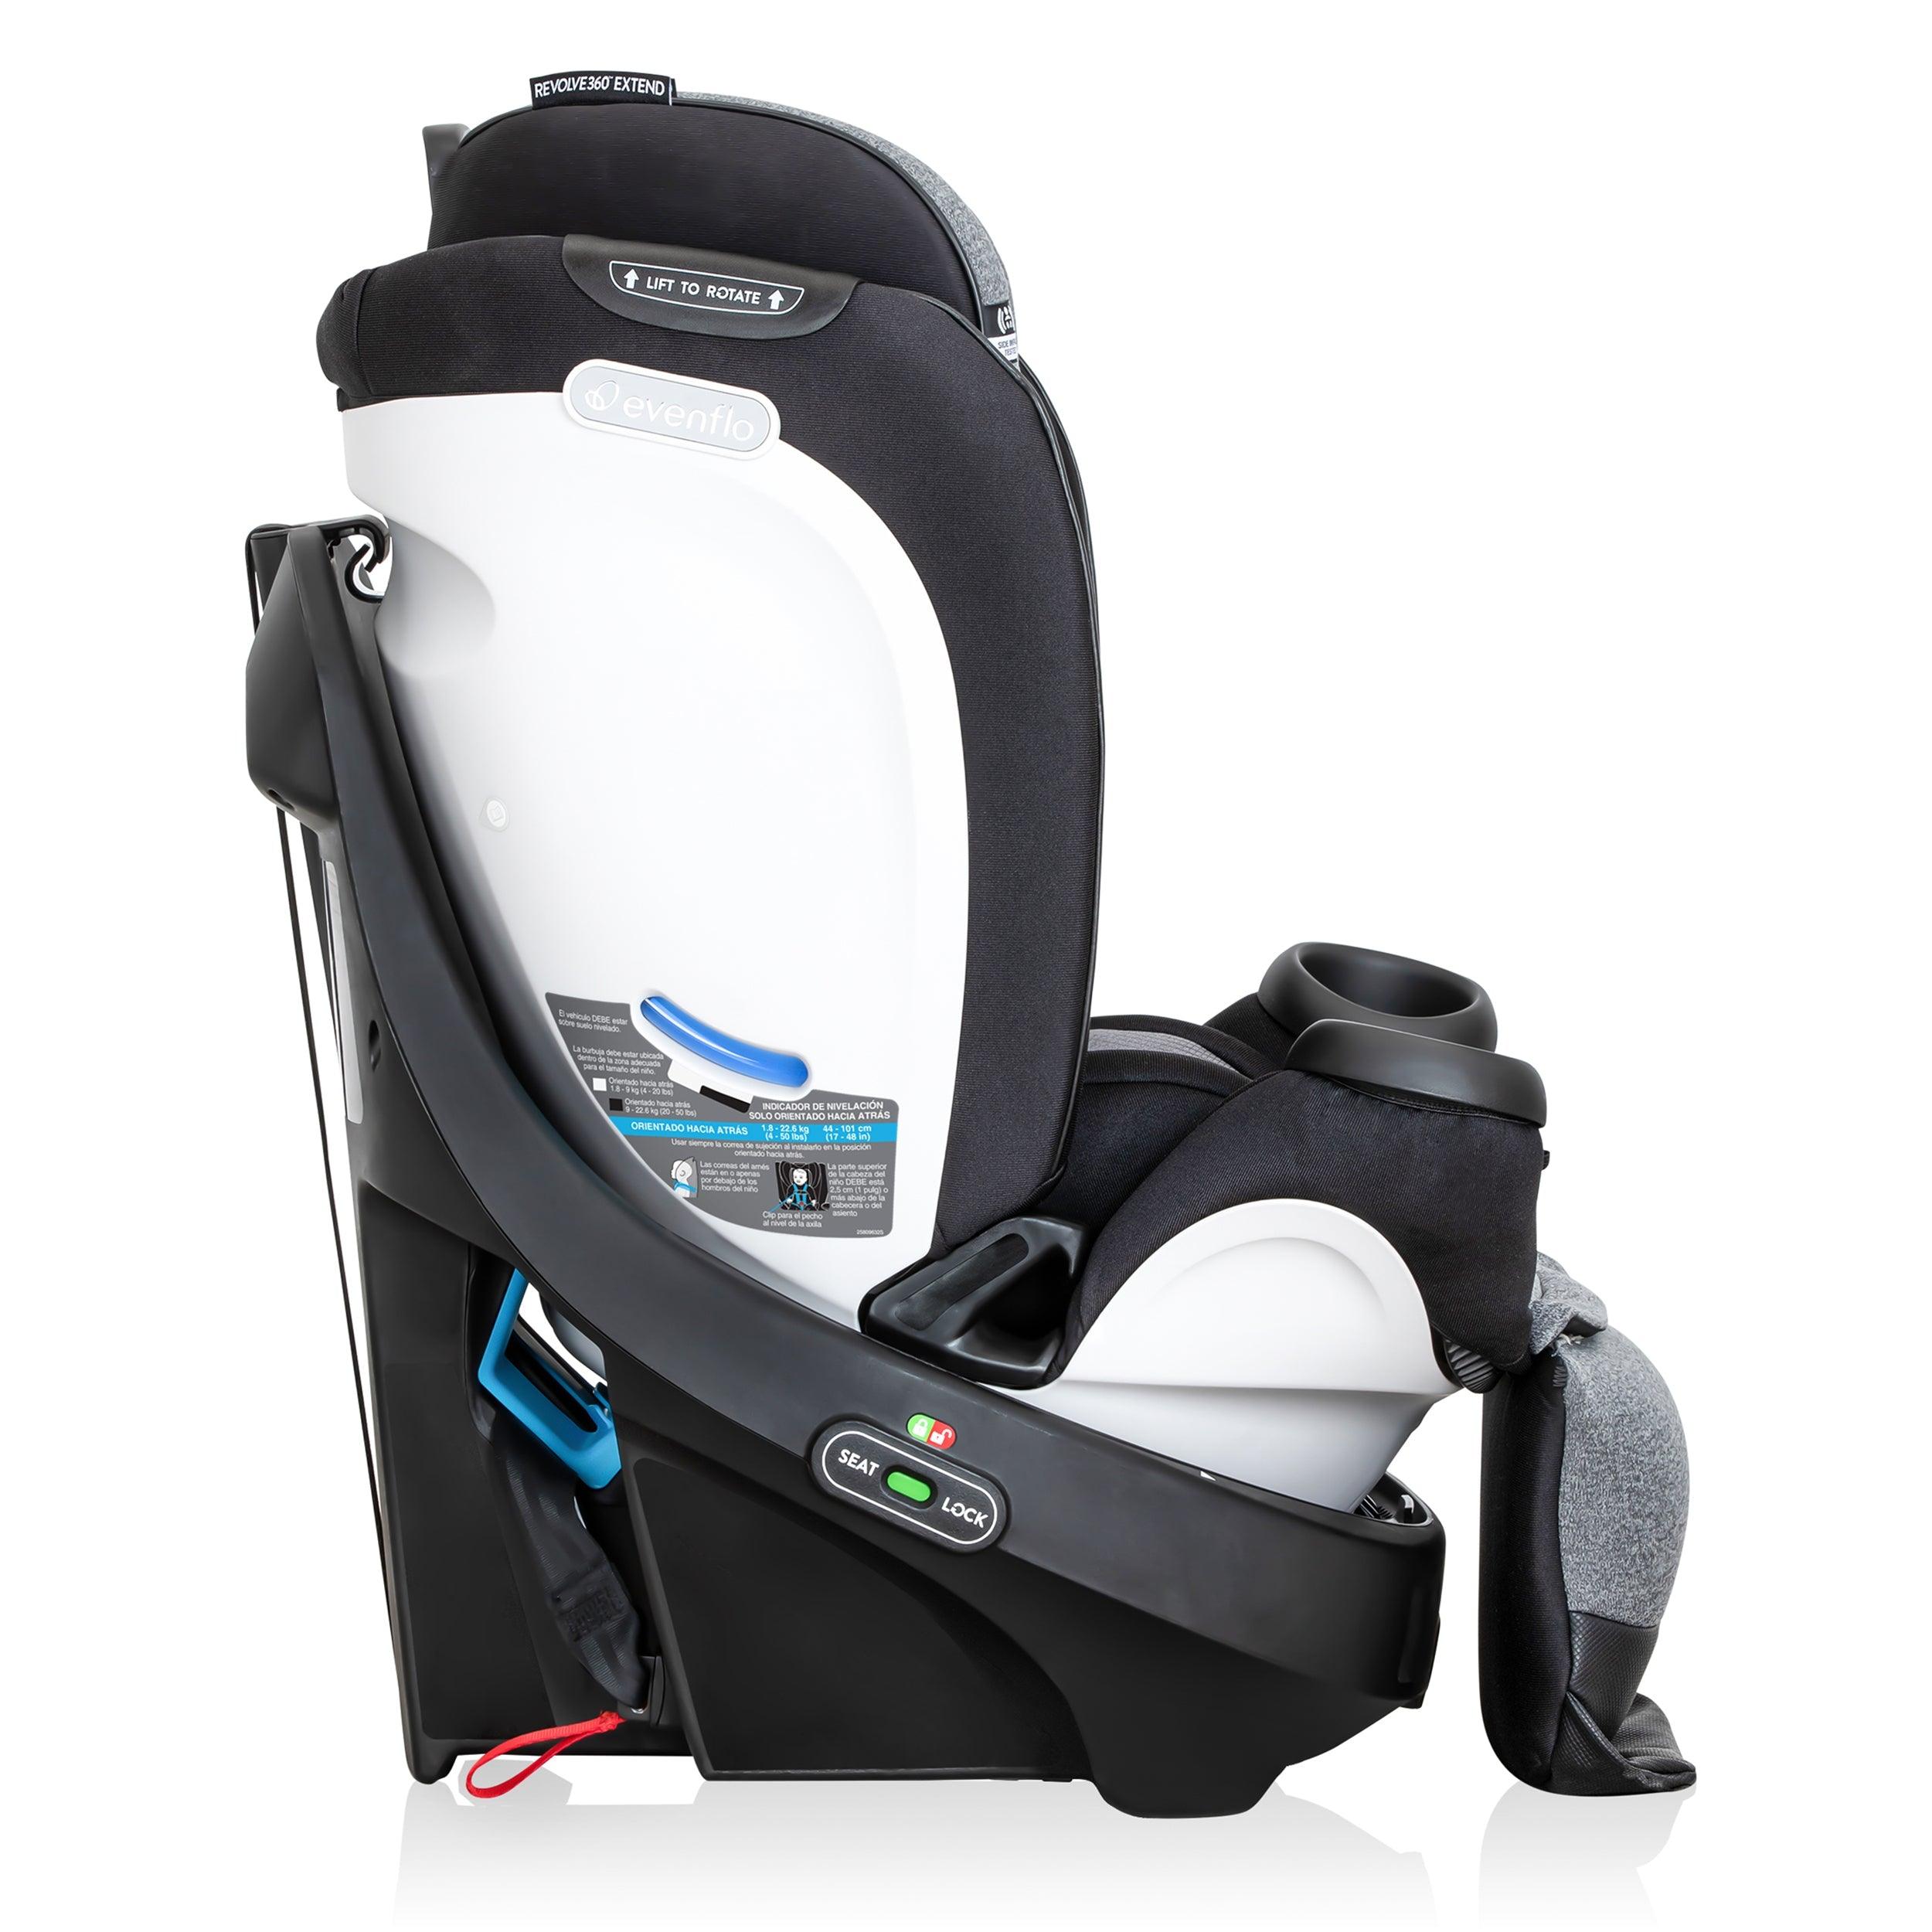 Evenflo Revolve360 Review - Car Seats For The Littles